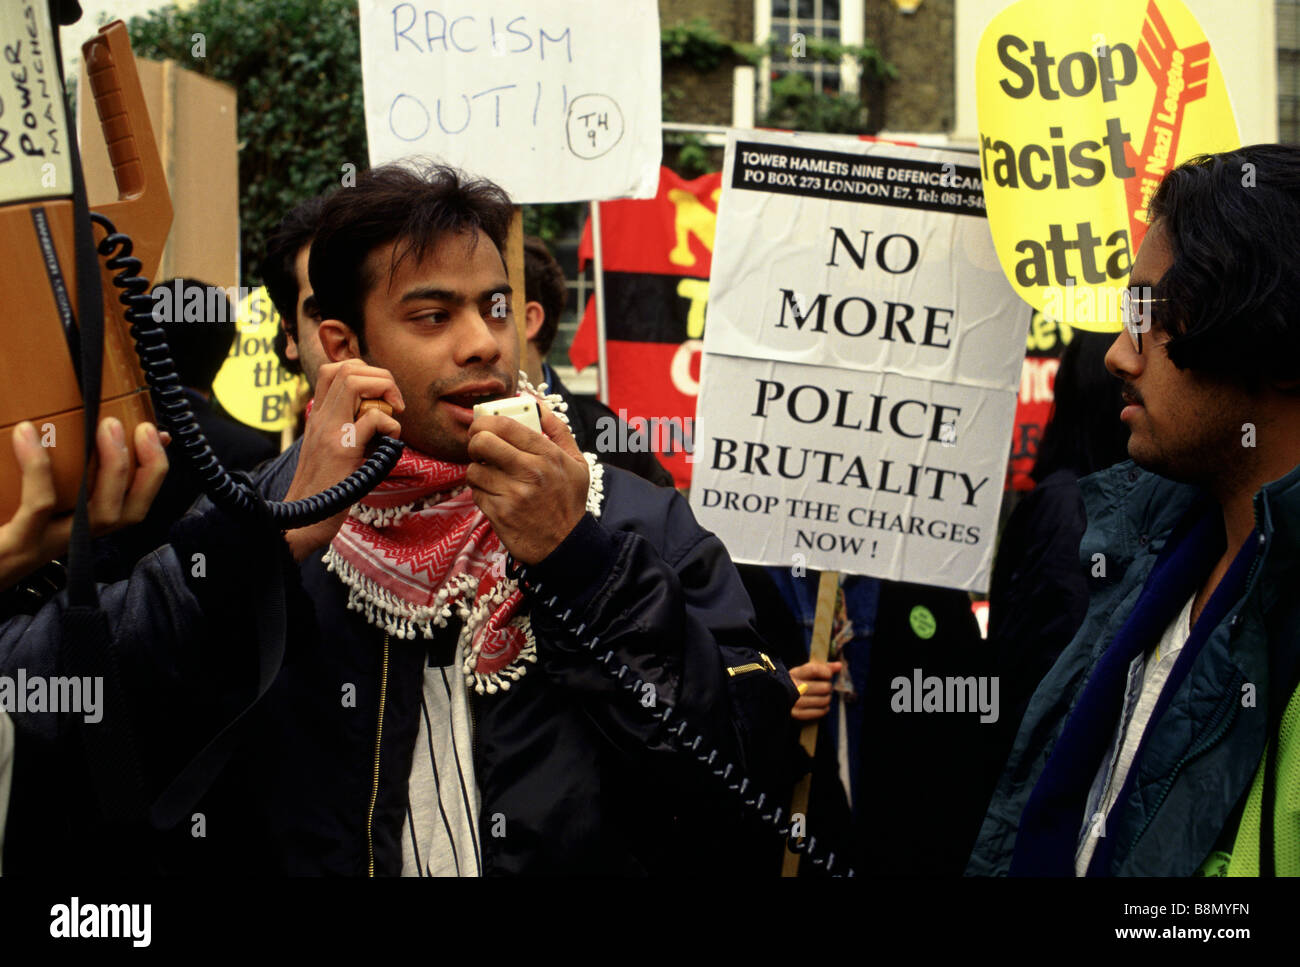 Tower Hamlets, London, UK. Members of the Anti Nazi League (ANL) protest on Brick Lane against racist attacks on the local community. Stock Photo